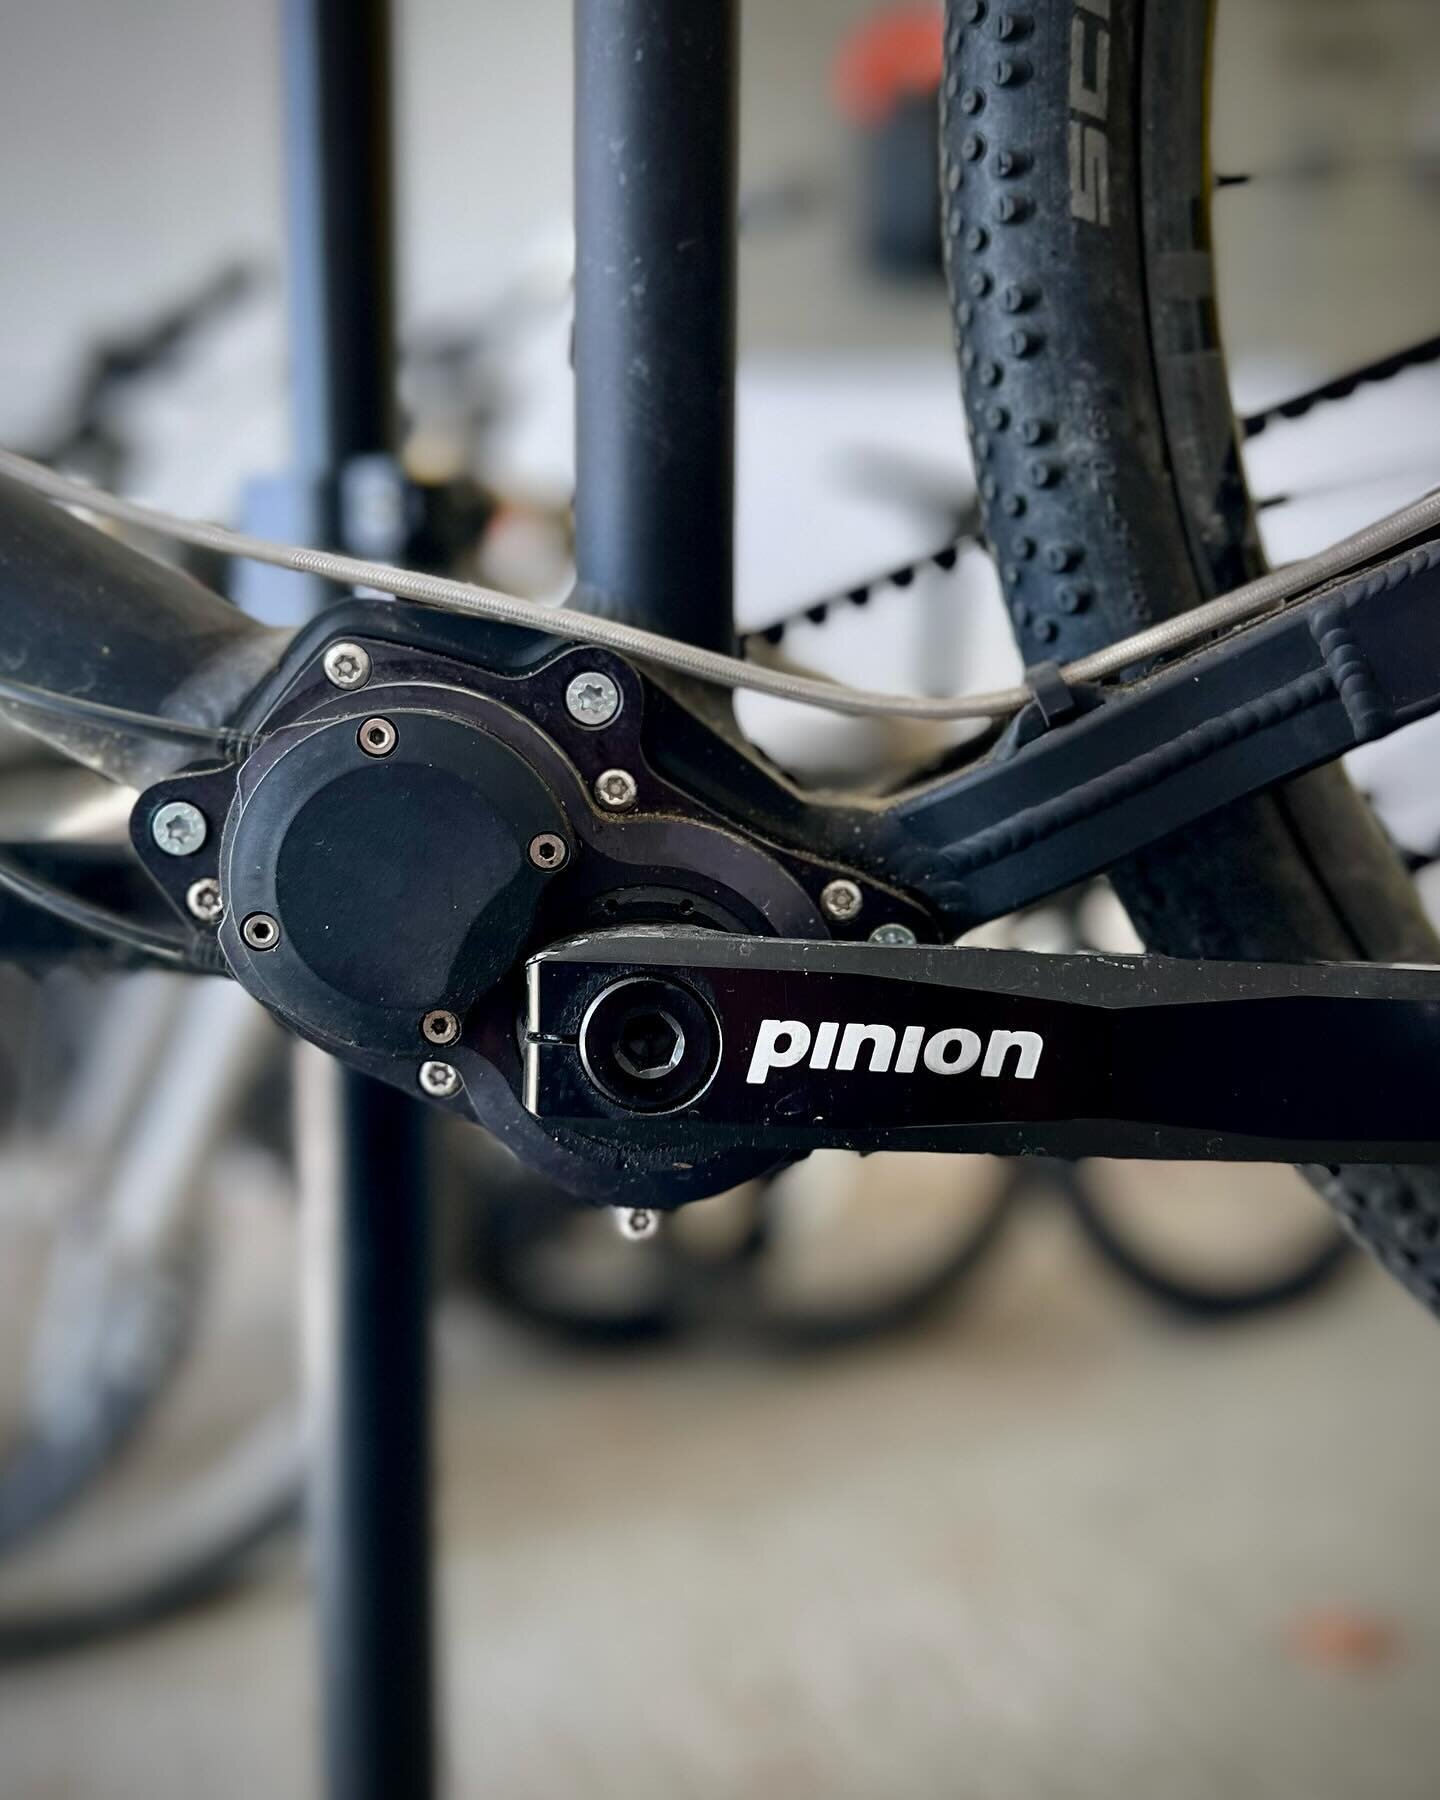 🔥 Pinion Drive 🔥

Some aspects of the Pinion/Gates drivetrain can be debated against that of derailleurs like weight (slightly more than a posh drivetrain, but in a better location for FS bikes), grip shift (whether you like it or not), shifting un